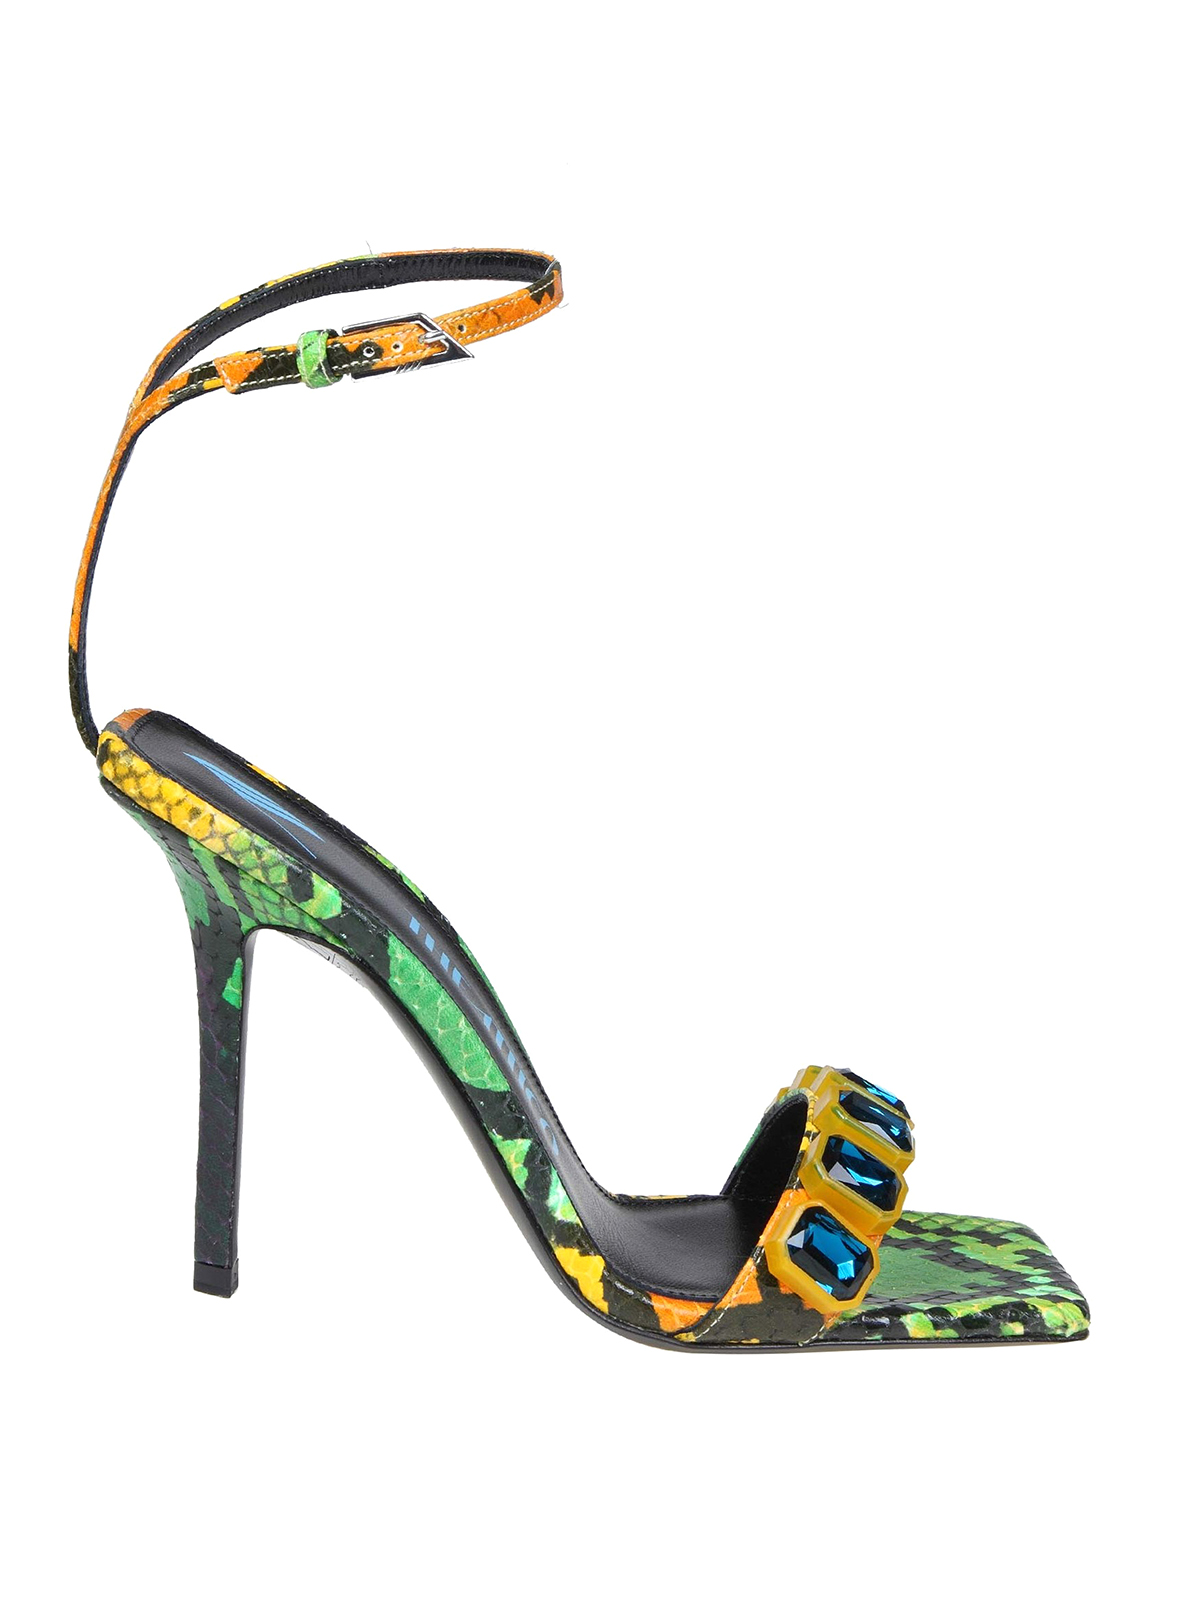 Attico Sienna Sandal In Python Printed Leather In Animal Print